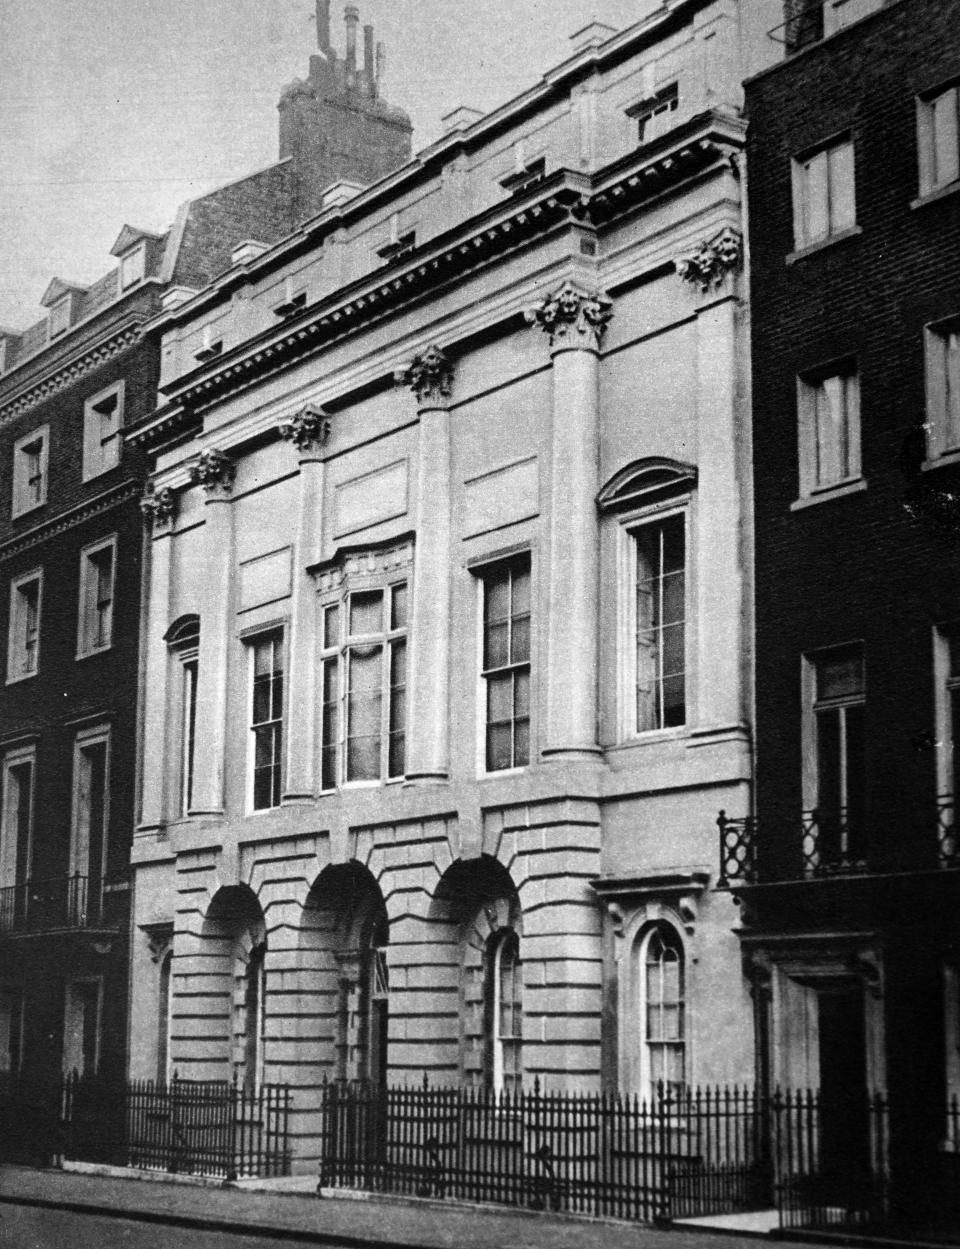 Home of Earl and Countess of Strathmore. at 17 Bruton Street. where Princess Elizabeth (later Queen Elizabeth II). was born. (Photo by: Universal History Archive/Universal Images Group via Getty Images)